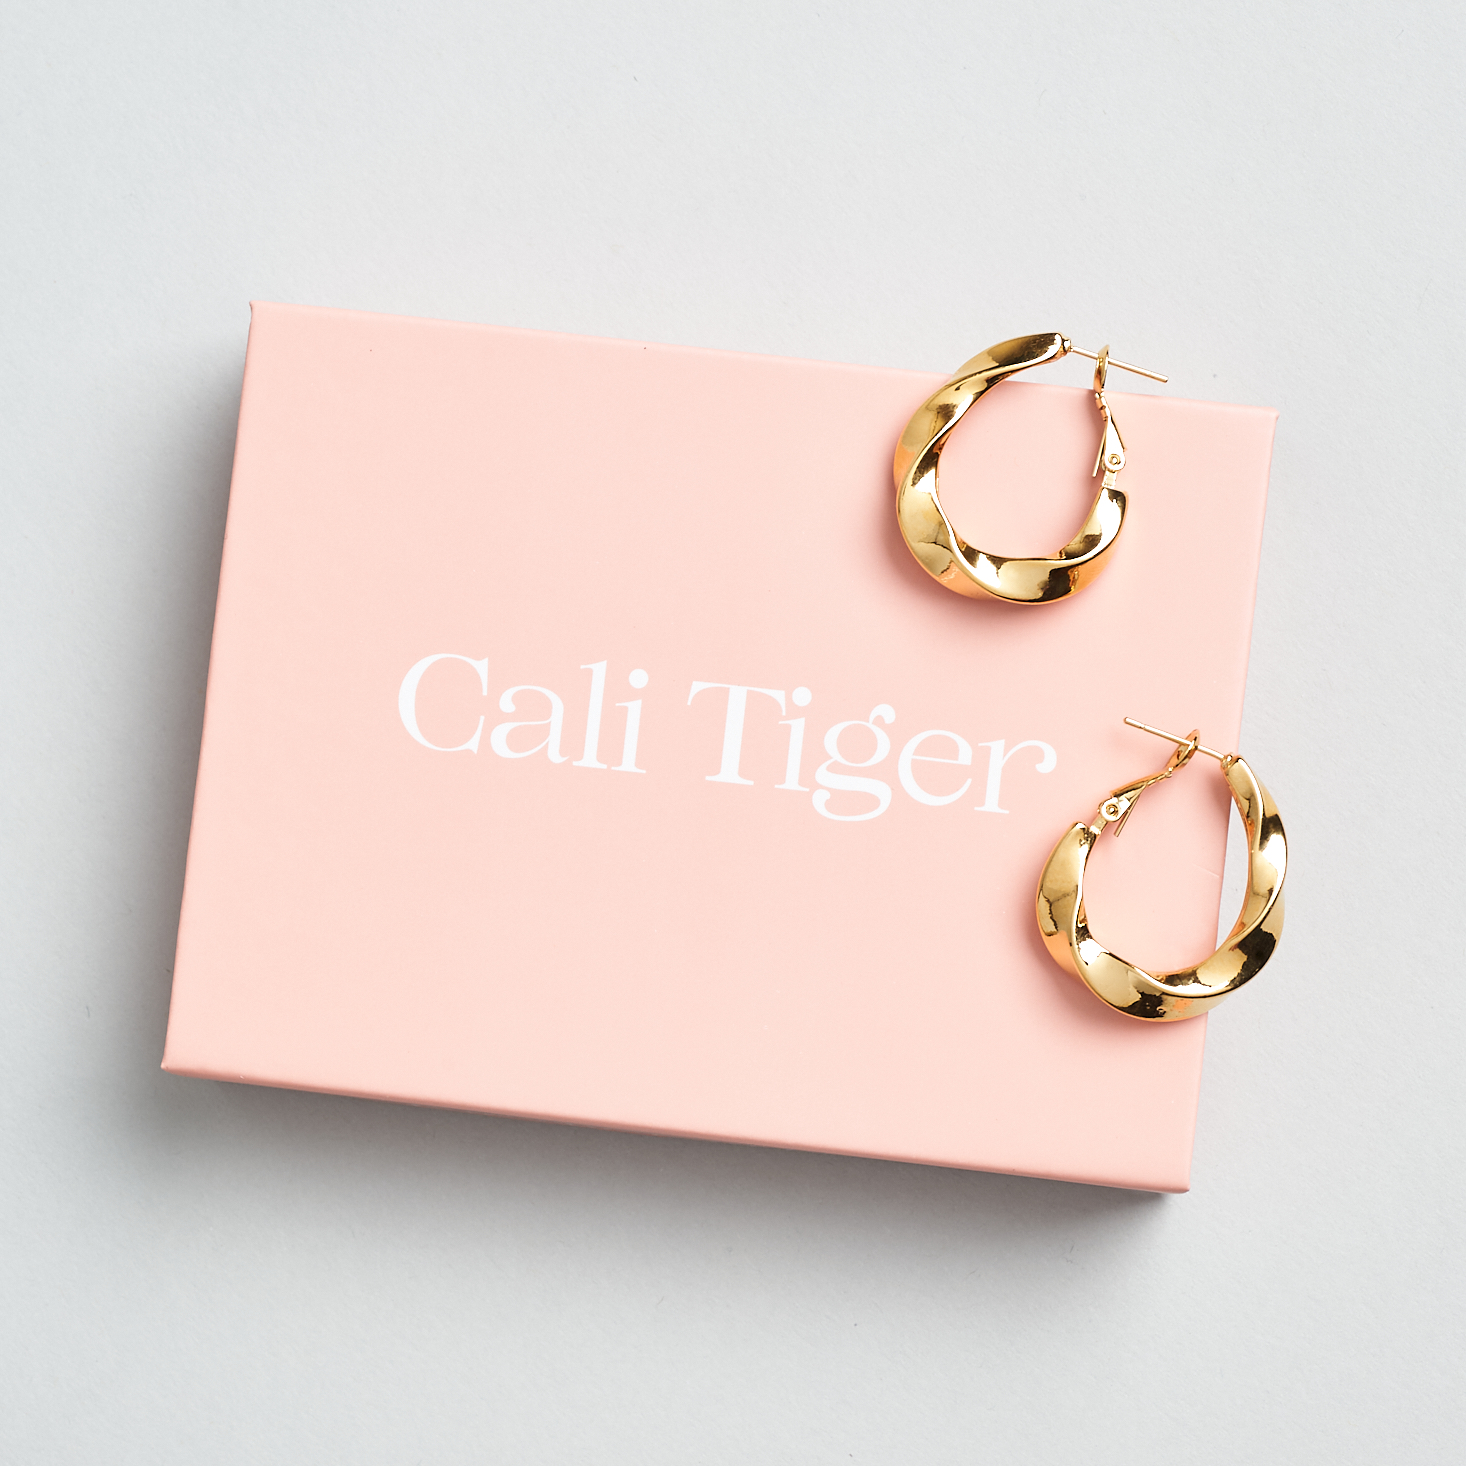 Cali Tiger Jewelry Box Review + Coupon – February 2021